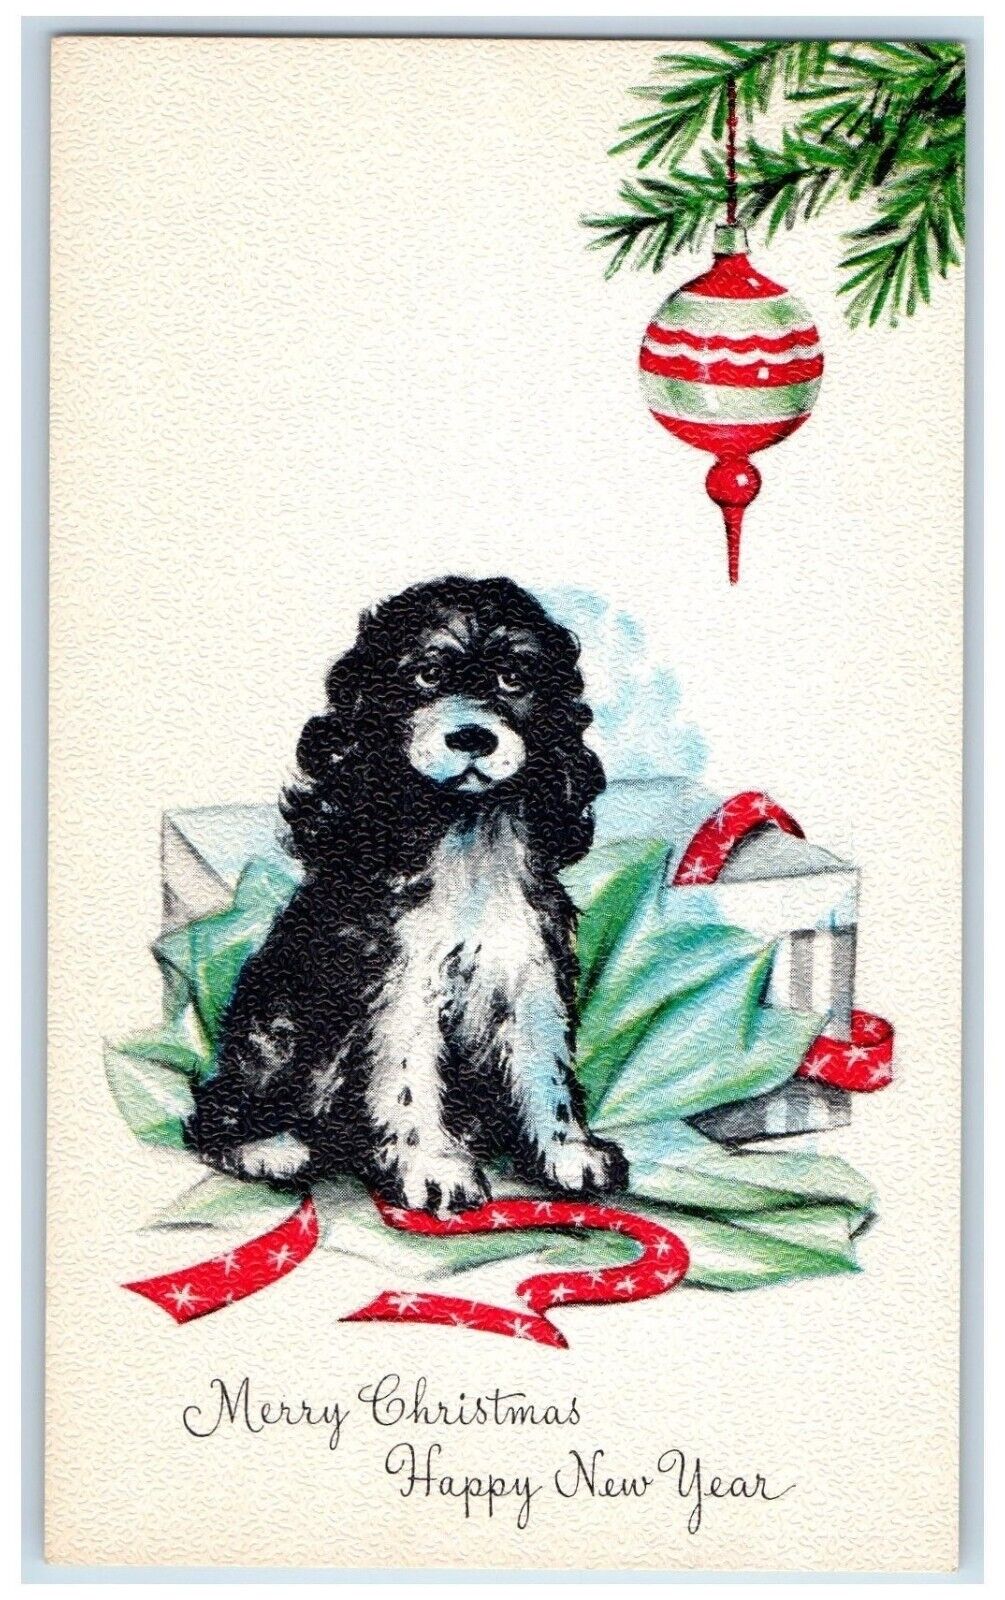 Merry Christmas And Happy New Year Cute Dog Balls Decoration Antique Postcard